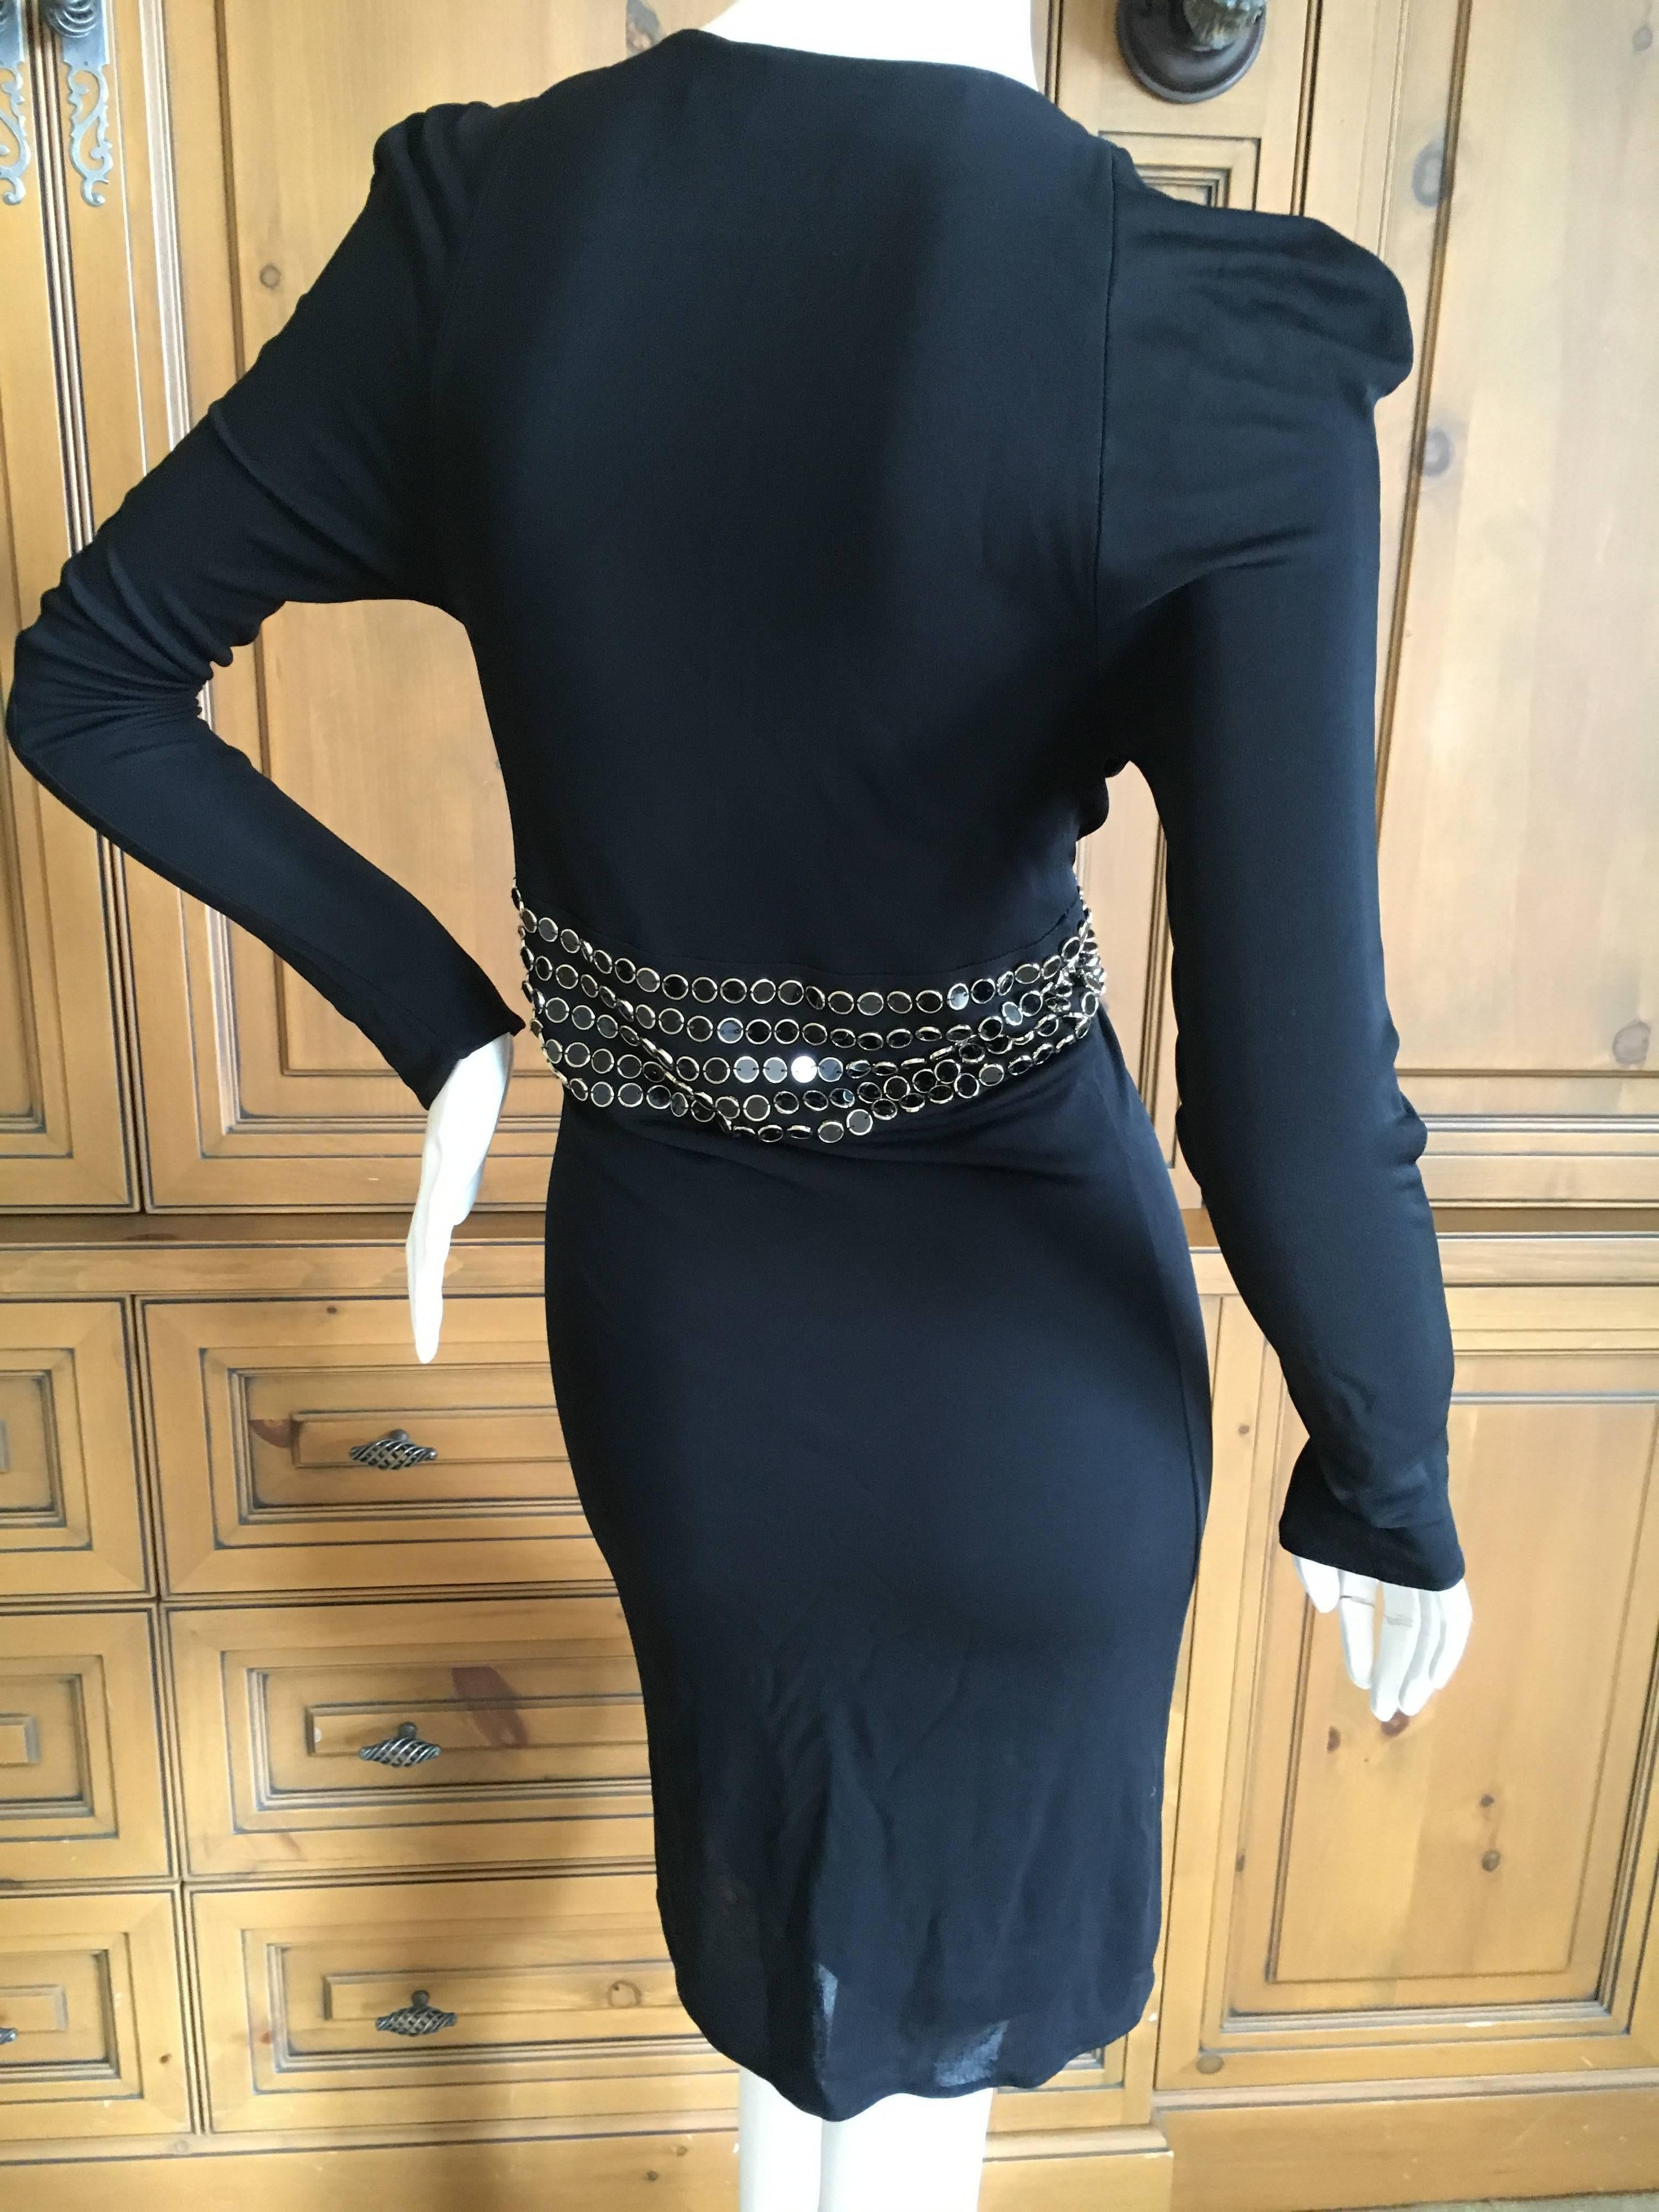 Women's Gucci Low Cut Embellished Little Black Dress by Tom Ford For Sale